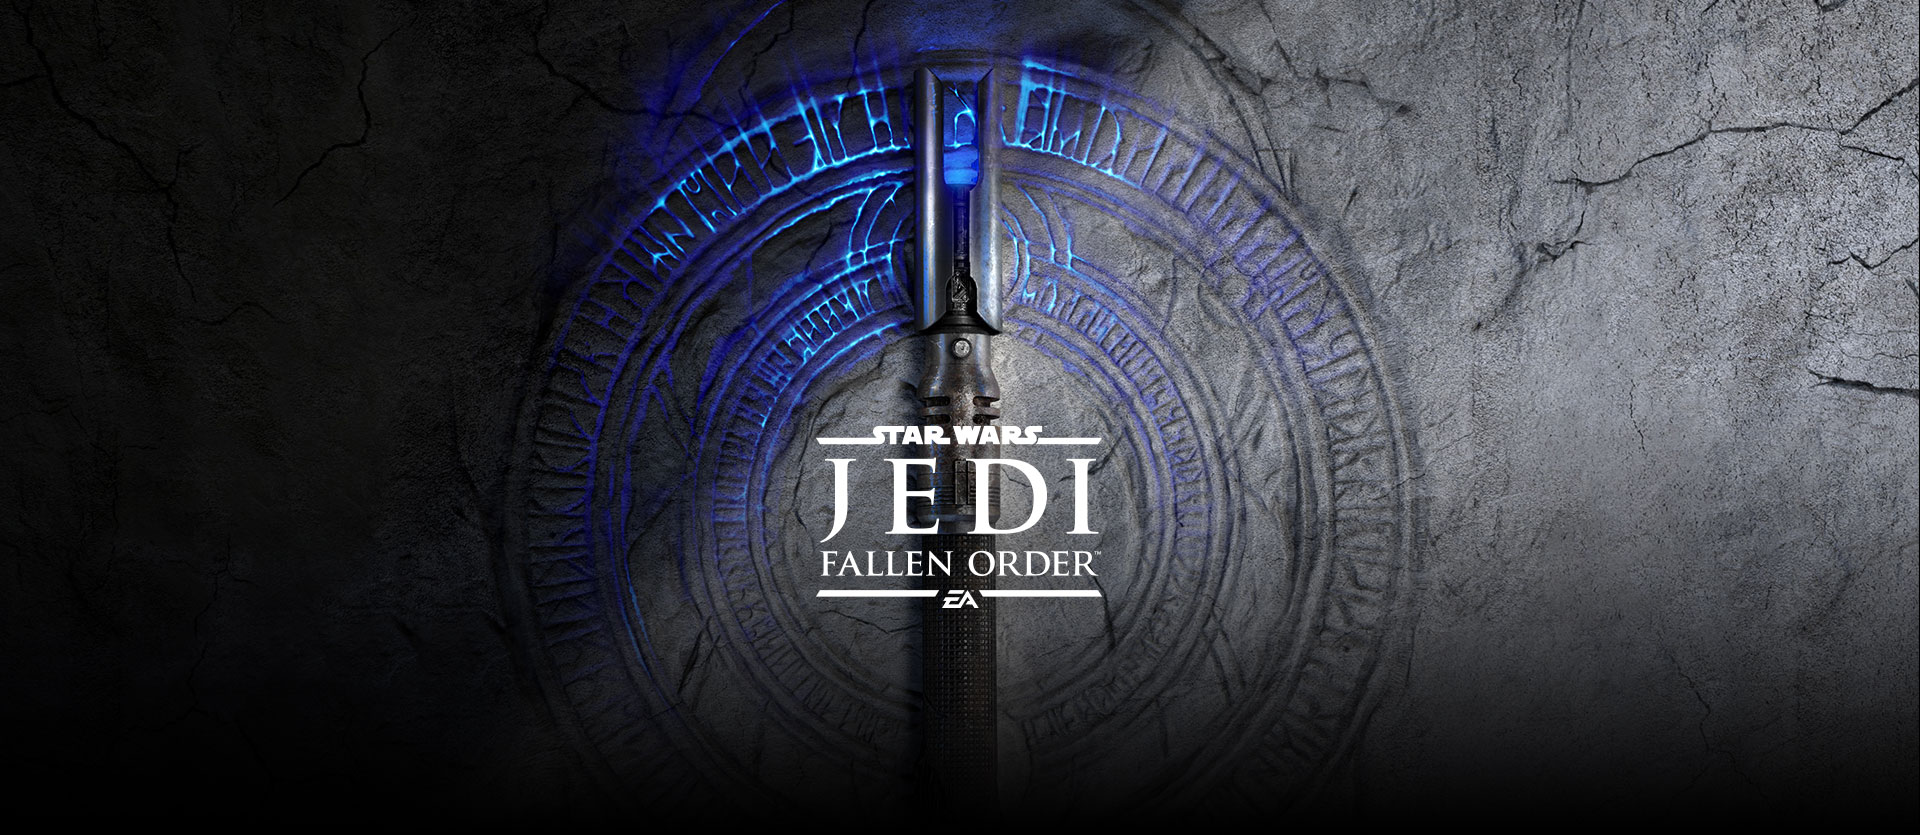 Star Wars Jedi: Fallen Order’s Protagonist Could Have Been Very Different